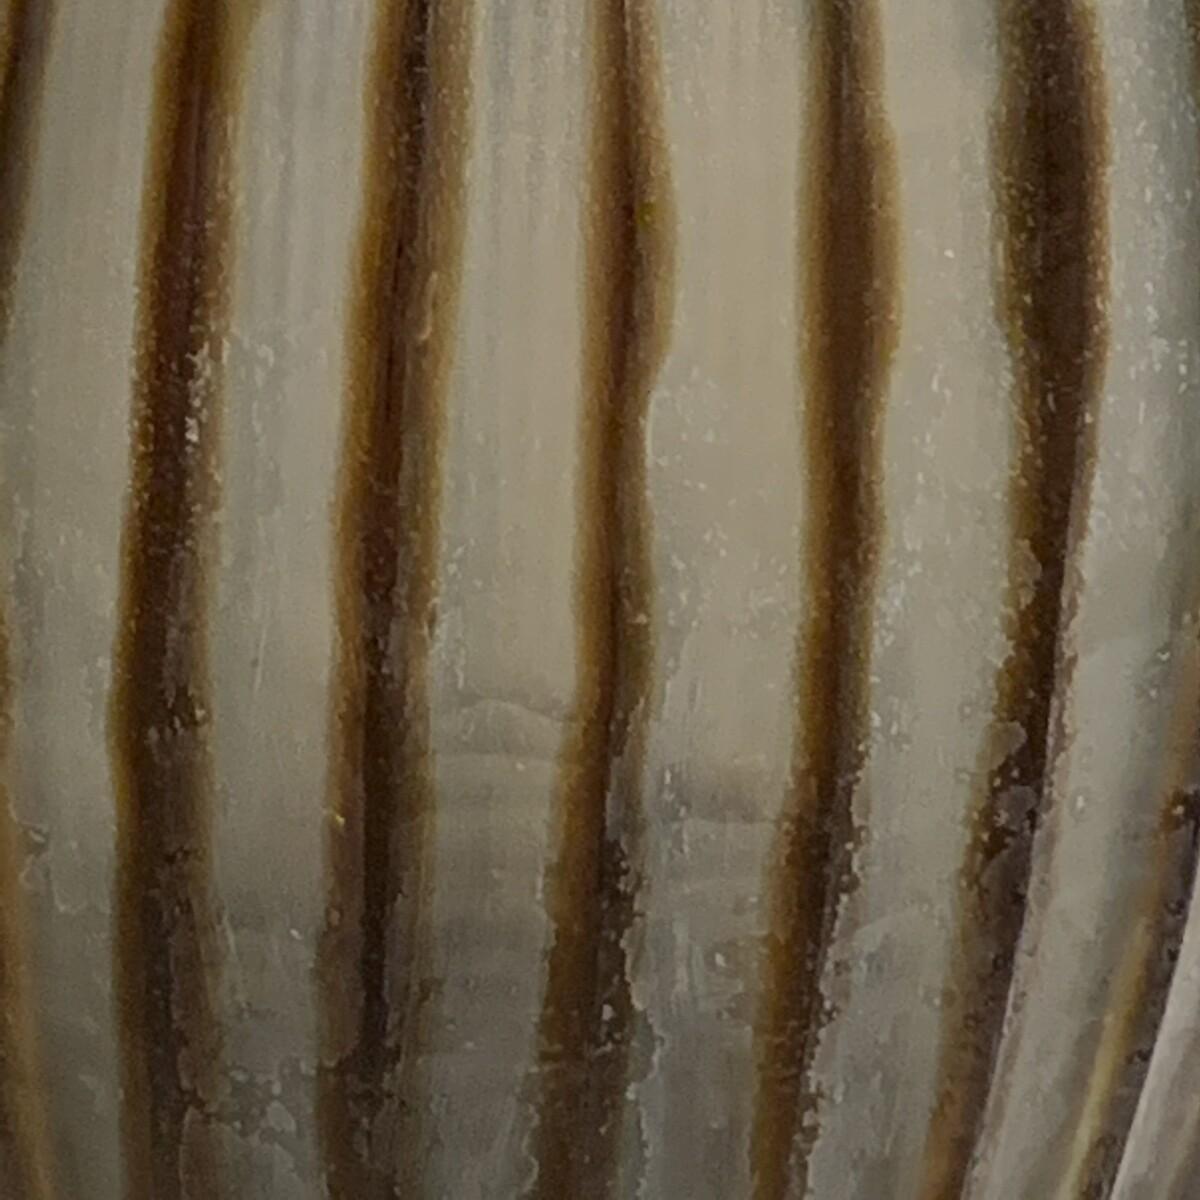 Vertical ribbed brown glass vase
Also available in a smaller size (S5440).
  